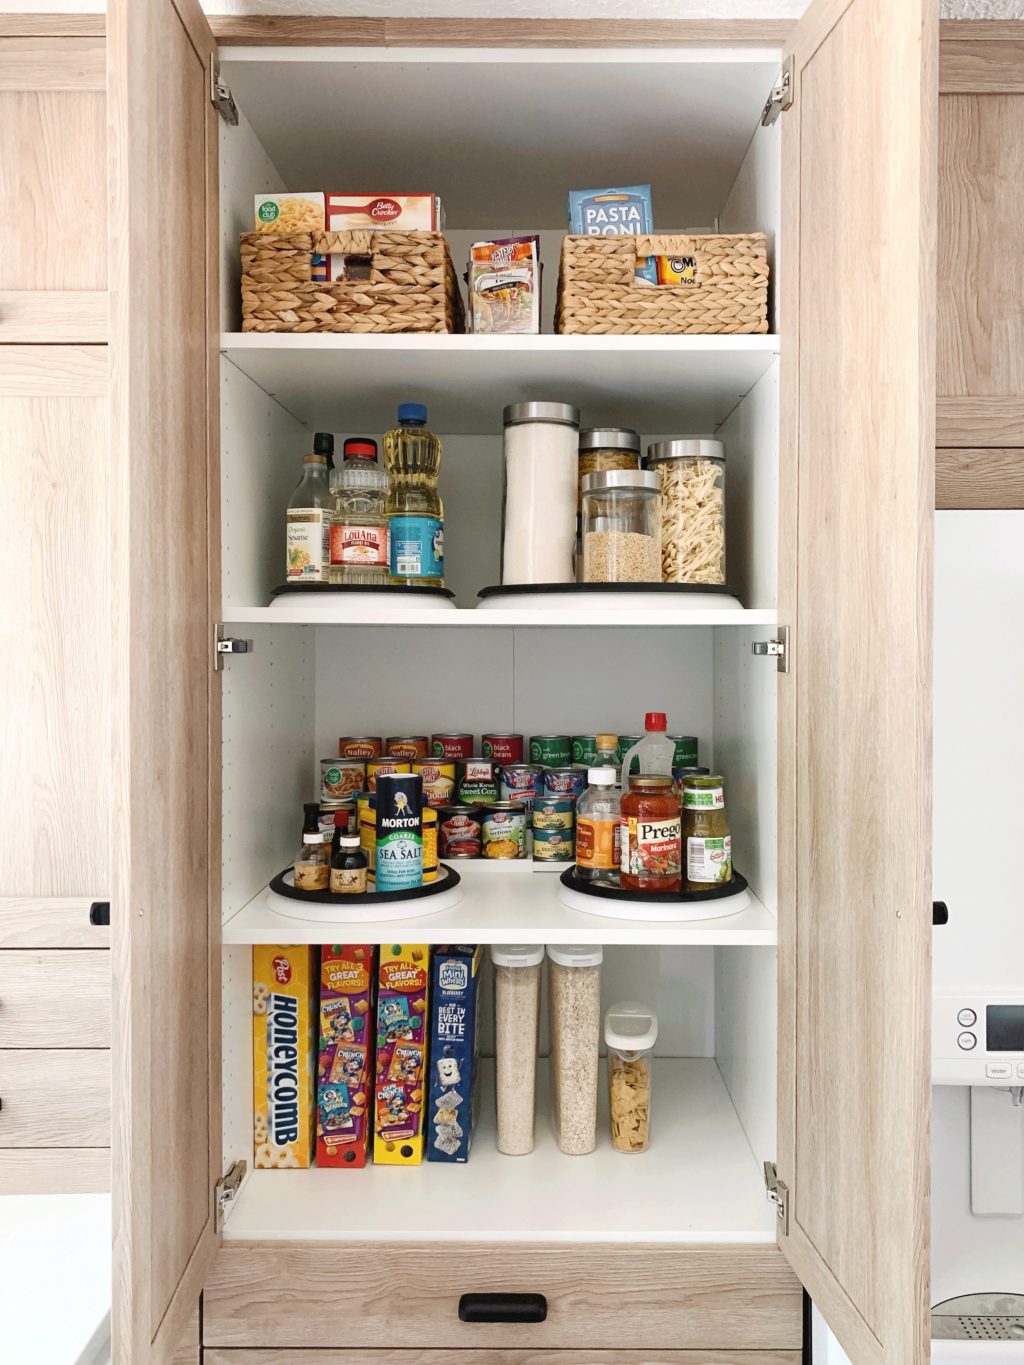 How to Organize Your Kitchen Cabinets Once and for All